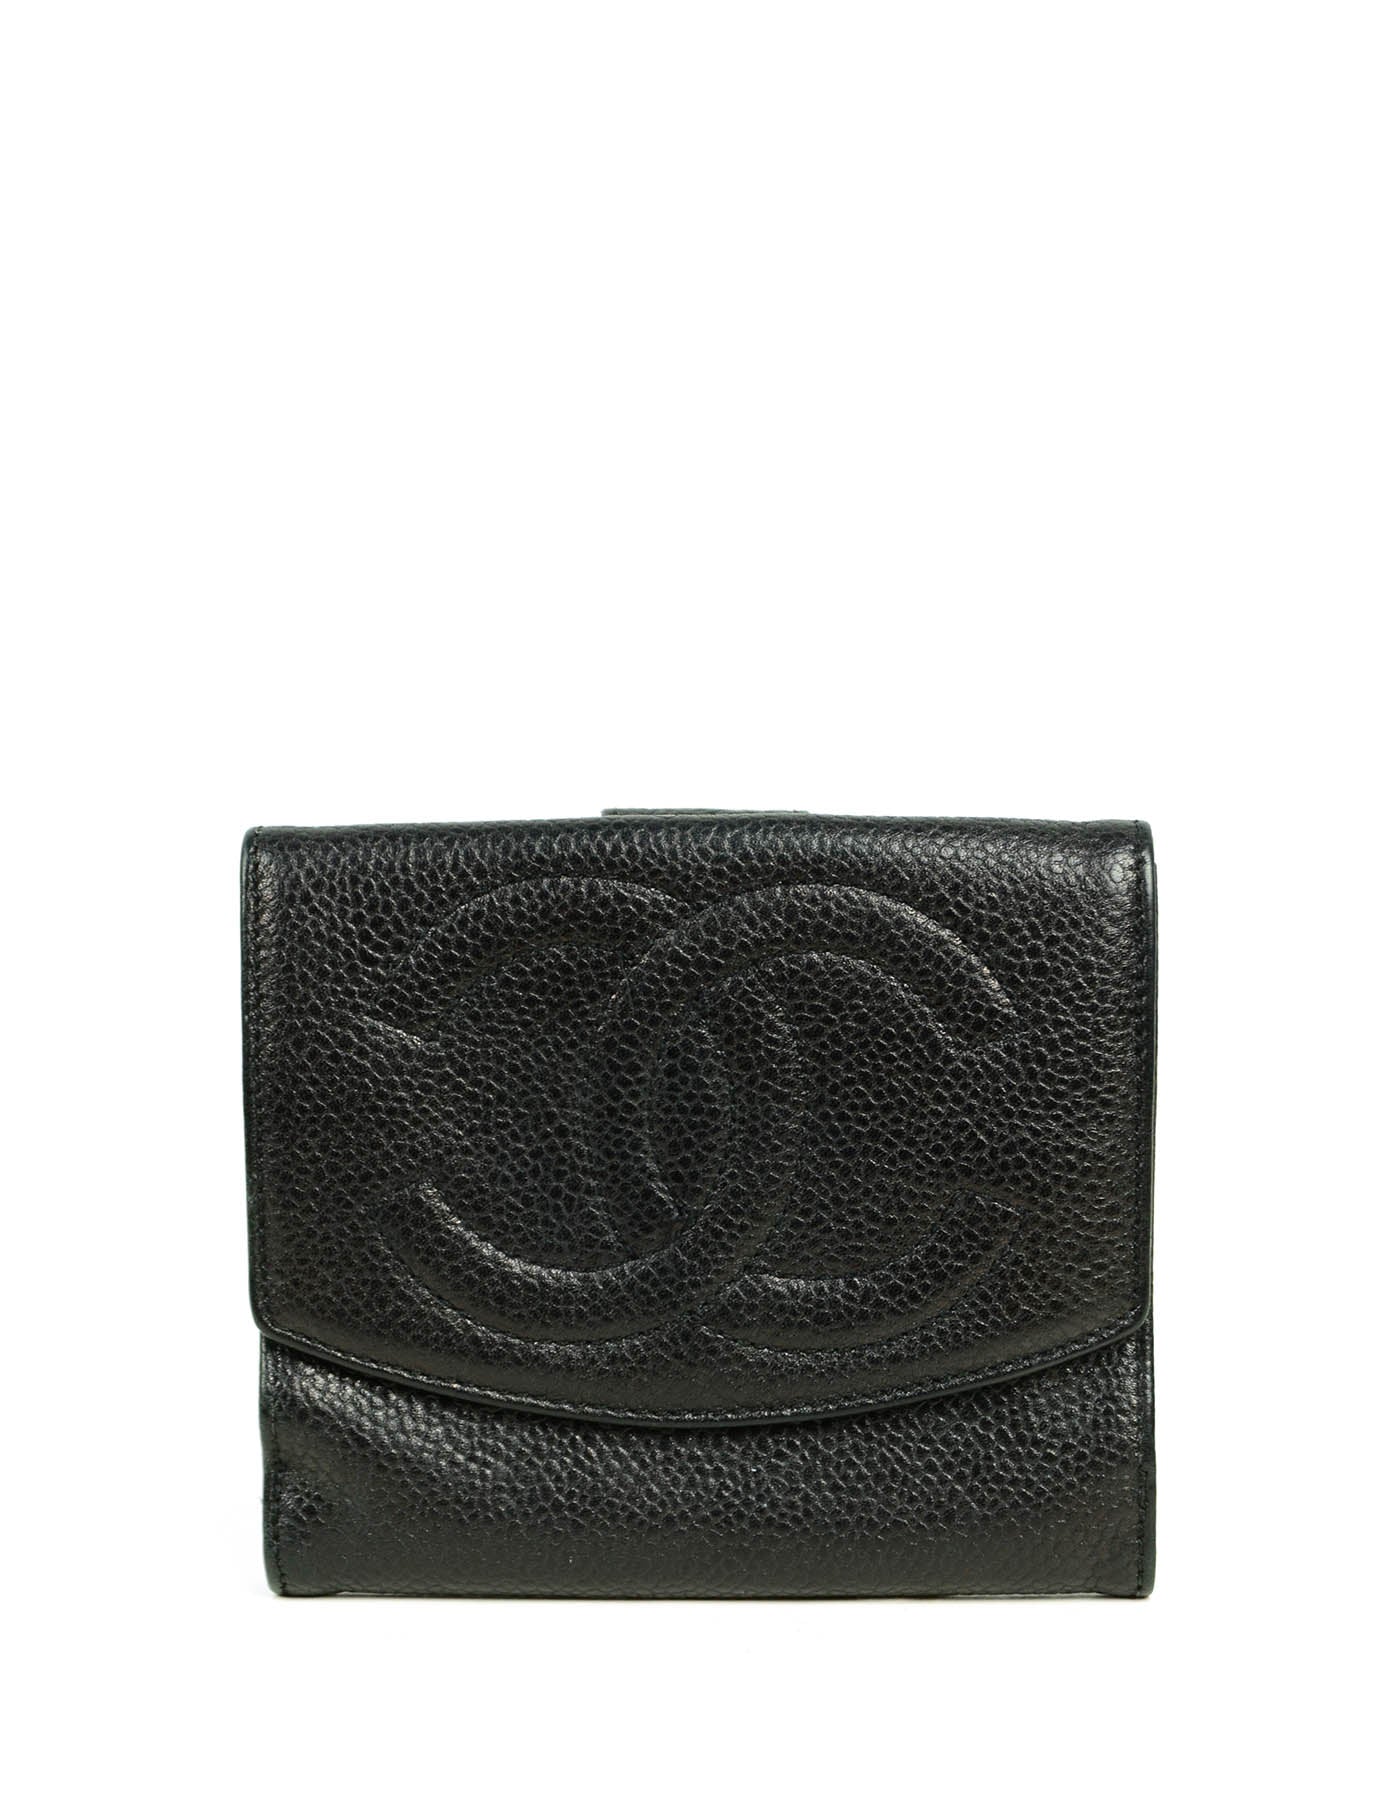 Chanel Black Caviar Leather Timeless CC Compact Wallet